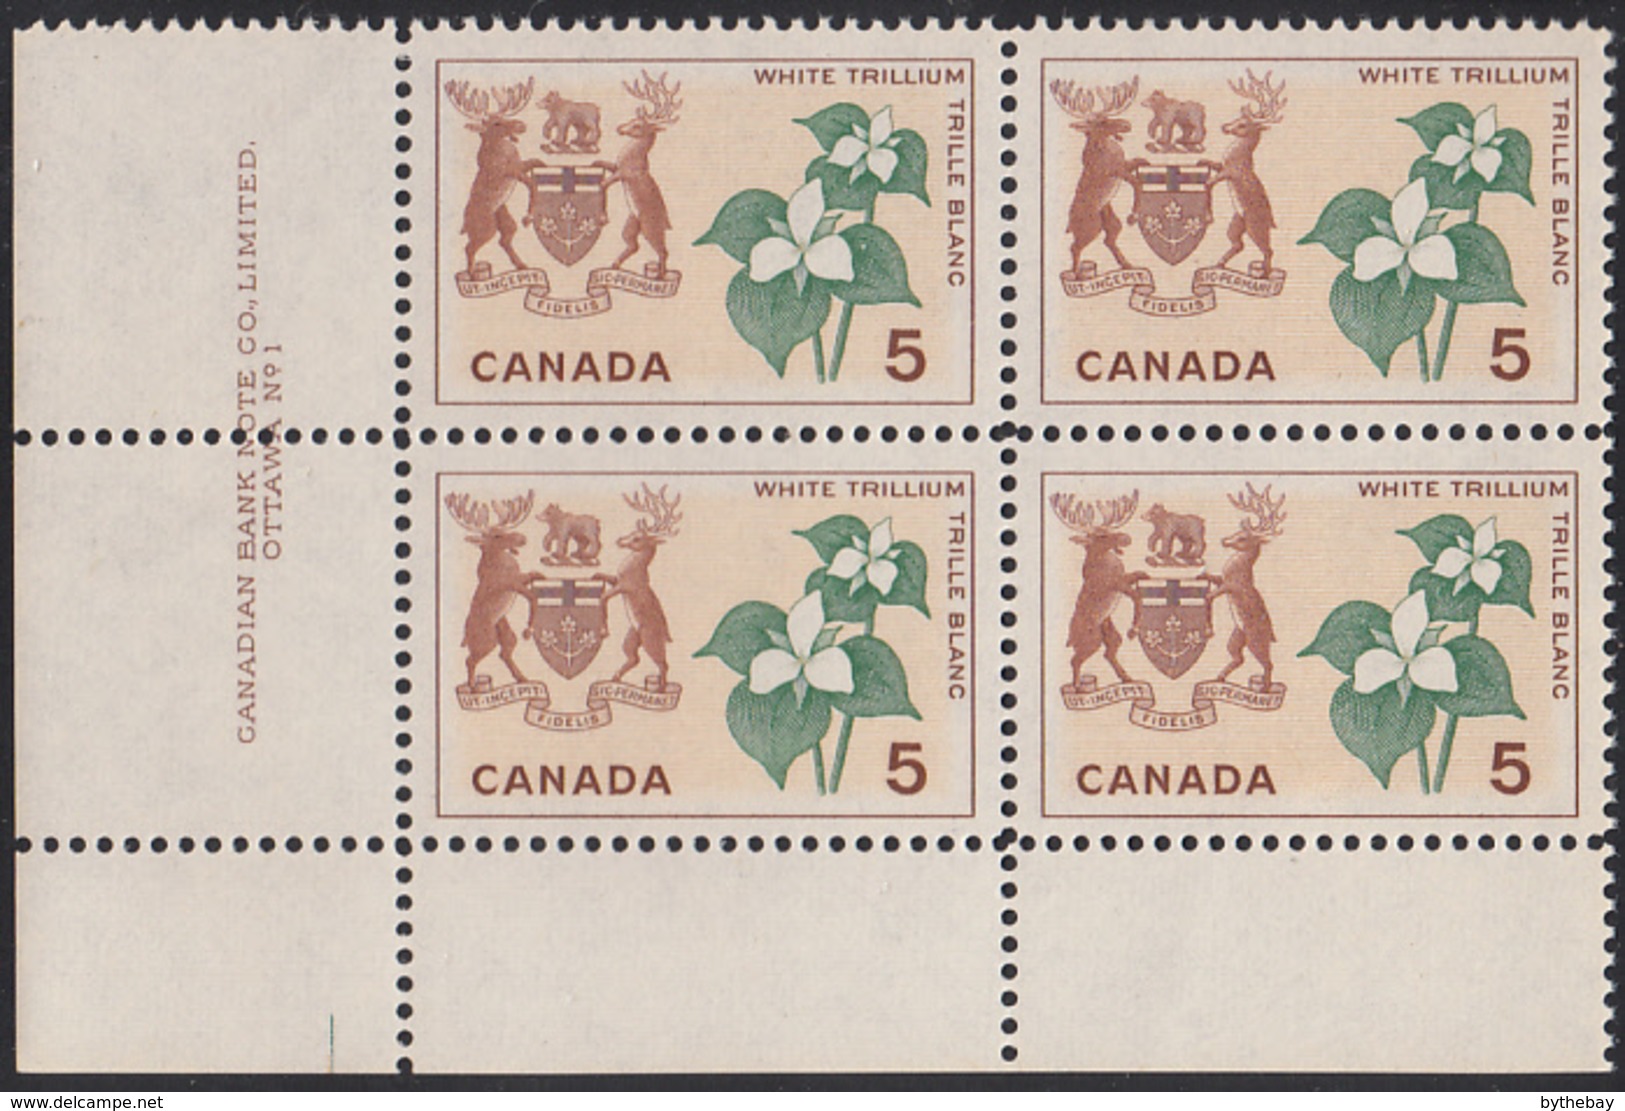 Canada 1964 MNH Sc #418 5c White Trillium Ontario Plate #1 LL - Plate Number & Inscriptions